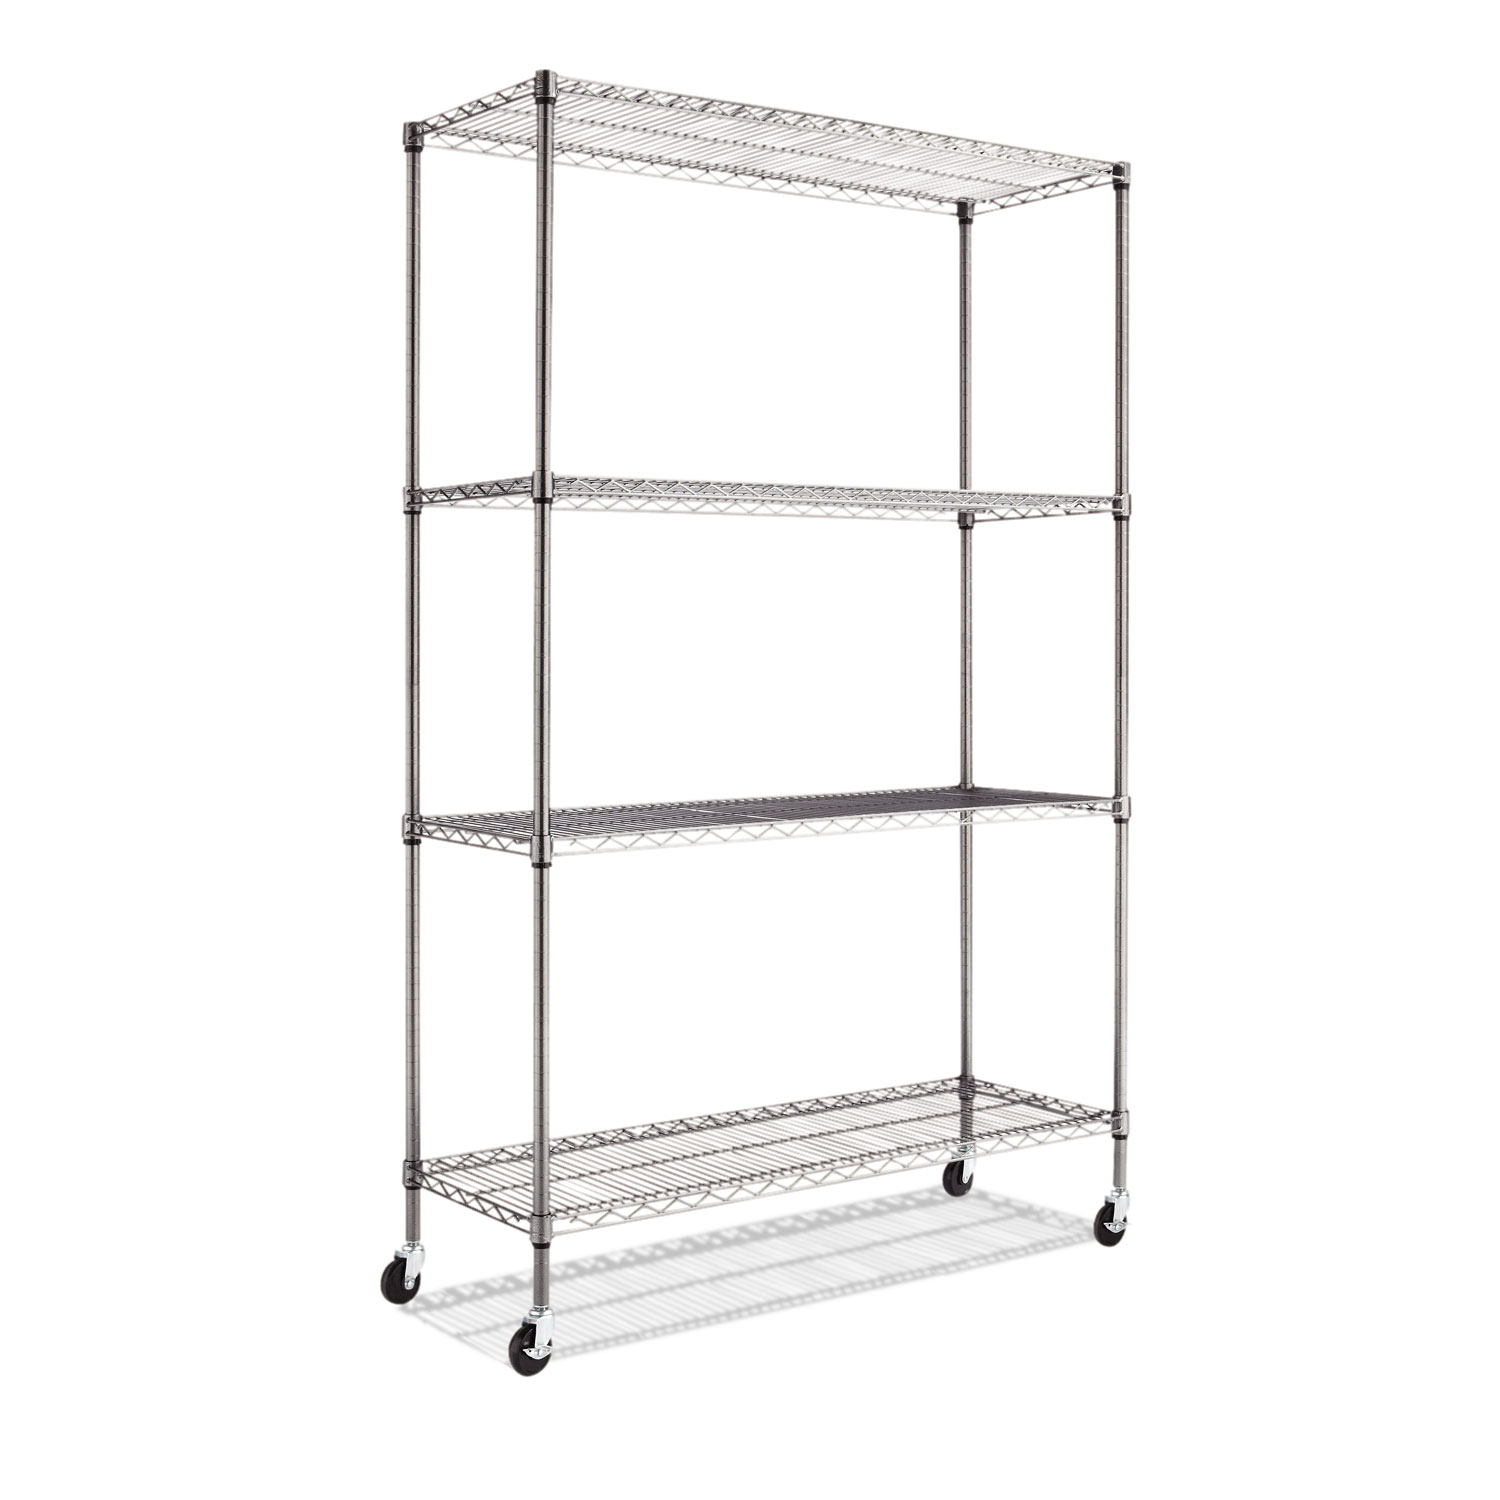 Alera Complete Wire Shelving Unit W, Welded Wire Shelving